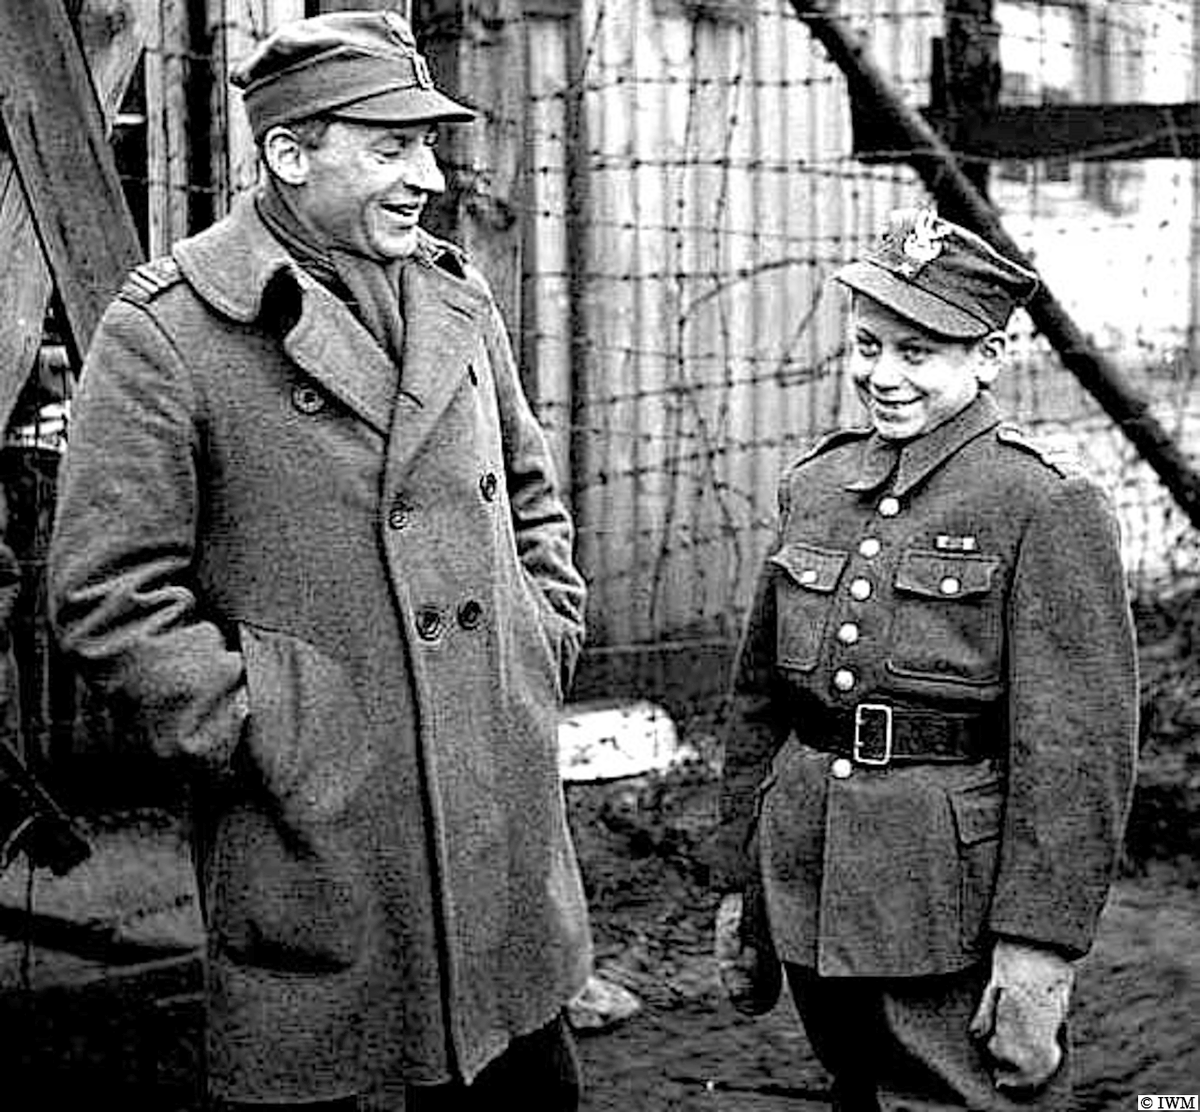 #OTD in 1945, Stalag 10-B, Germany. Brave 14 years old Polish boy named 'Lisek' (Little Fox) who knocked out two tanks during the Warsaw Uprising. #WW2 #HISTORY